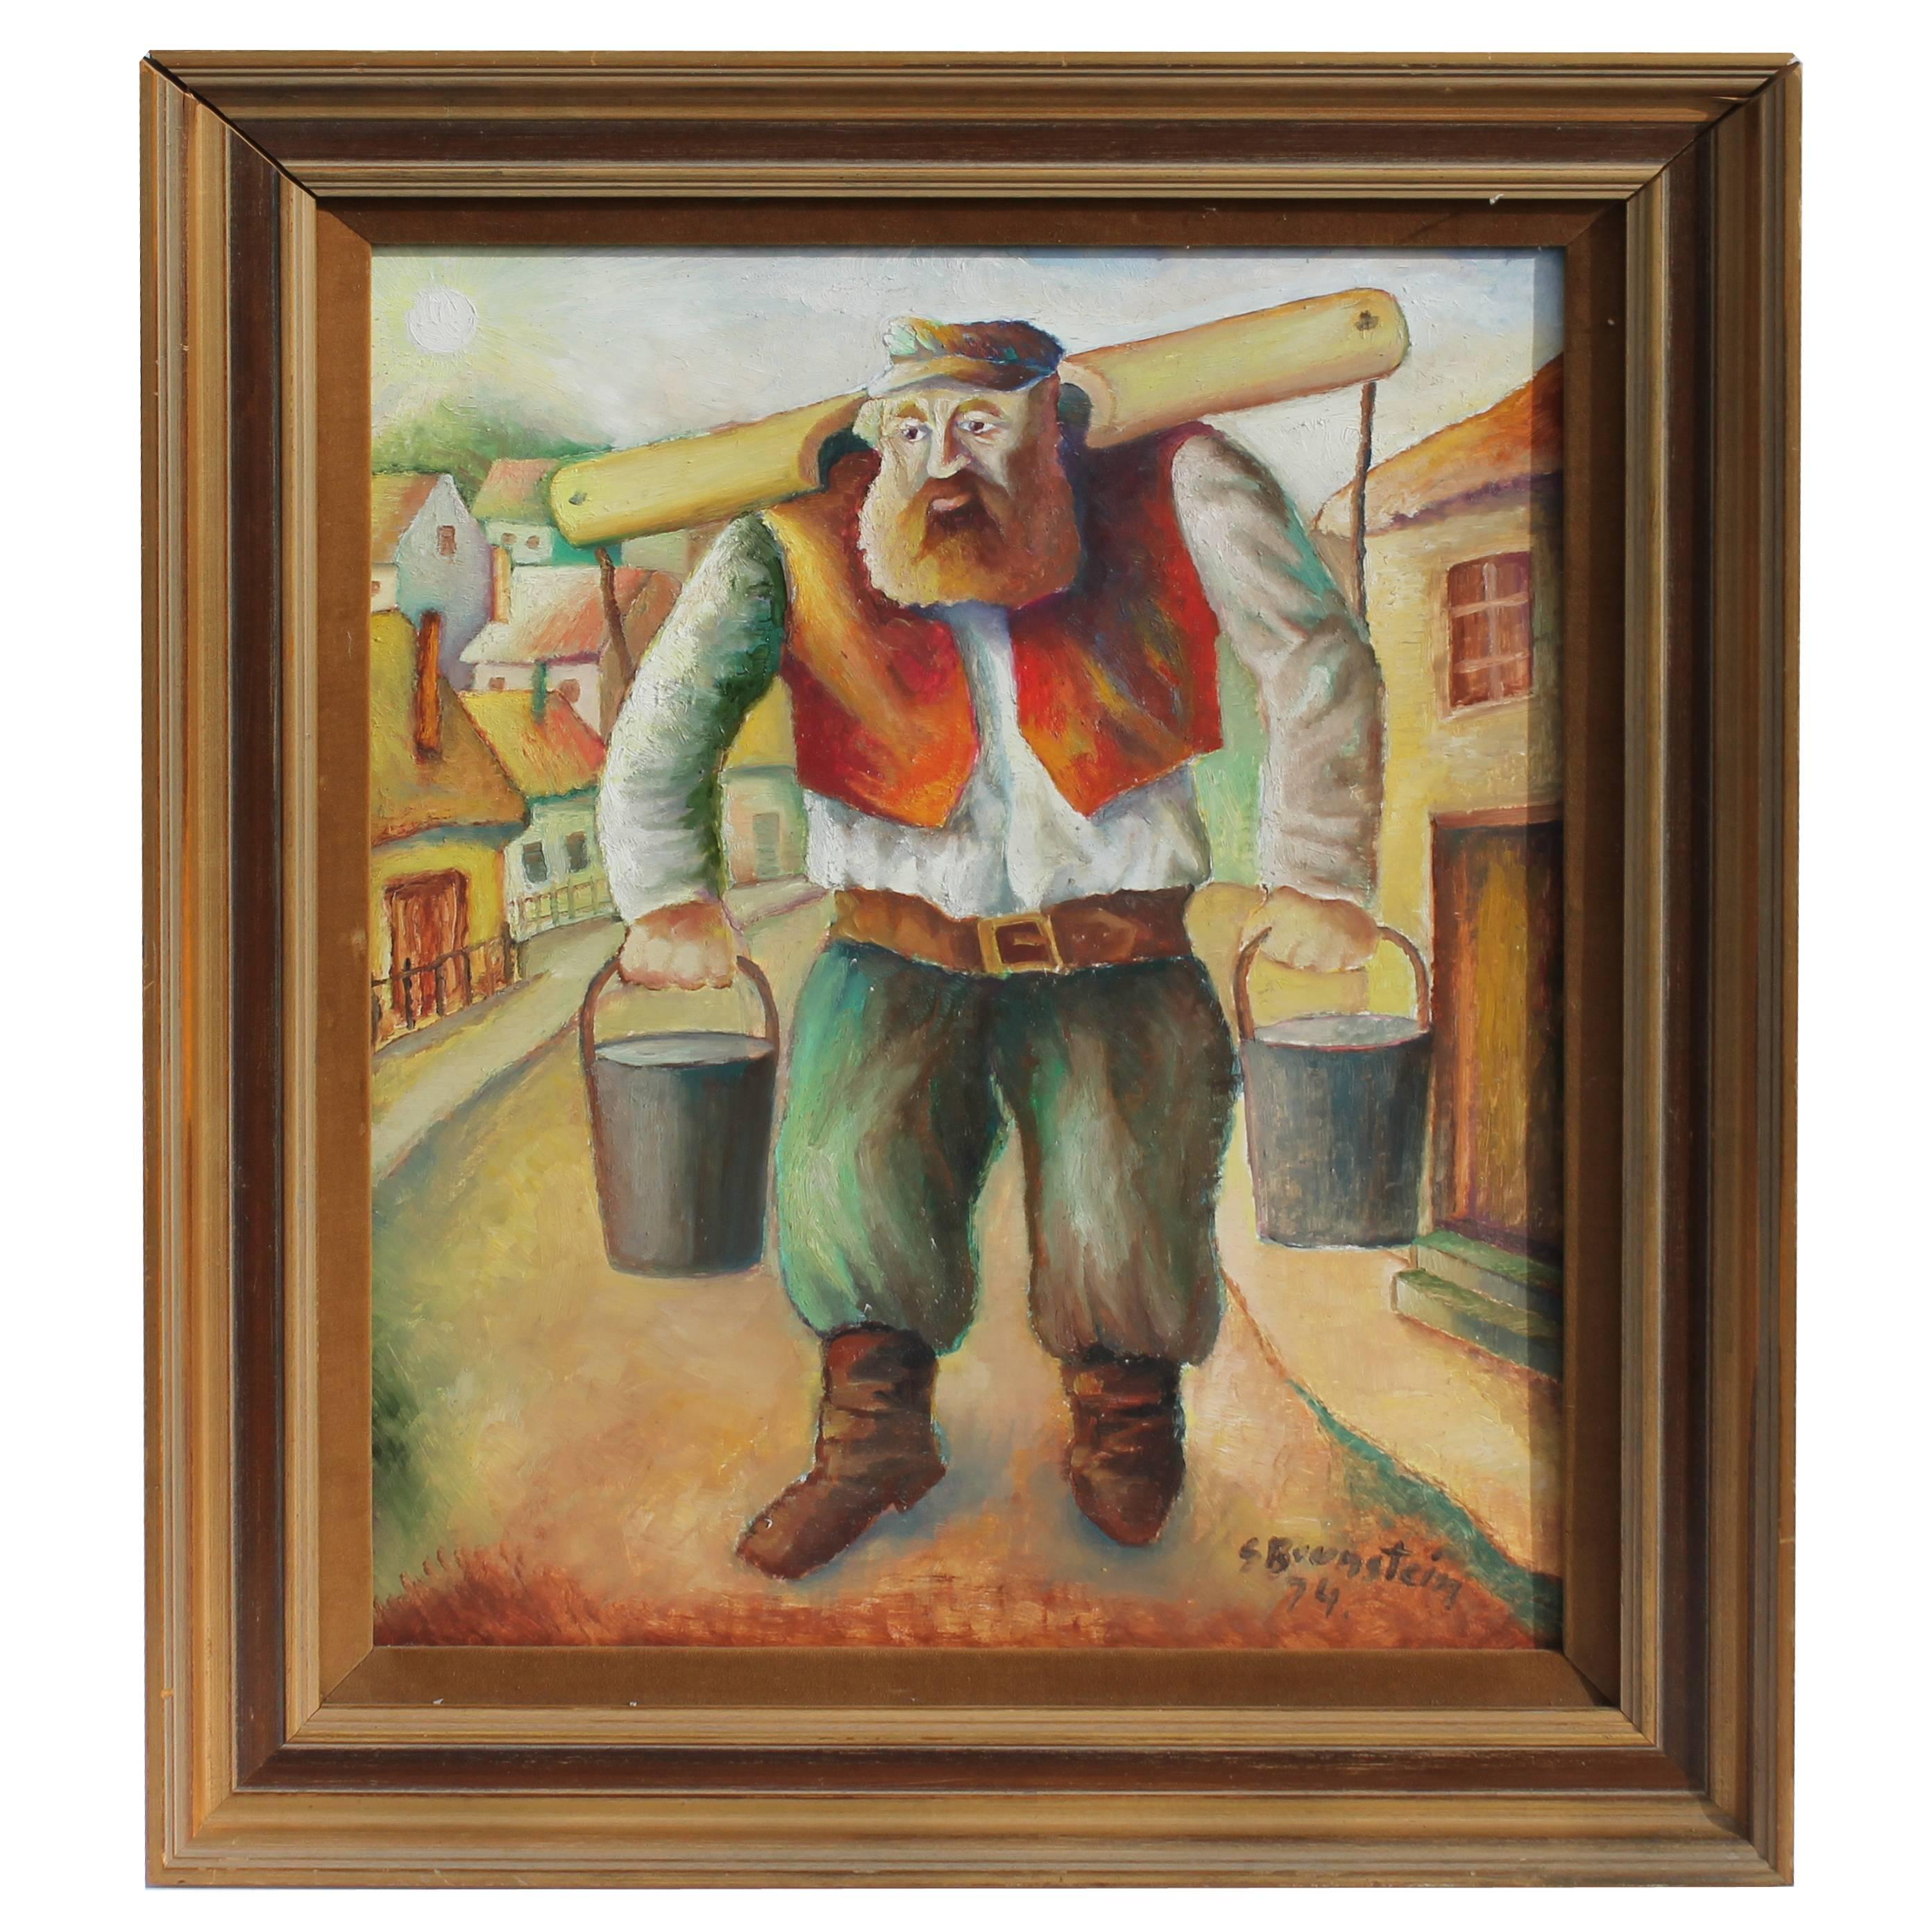 Signed and Dated Oil Painting of a Judaic Lumberjack For Sale